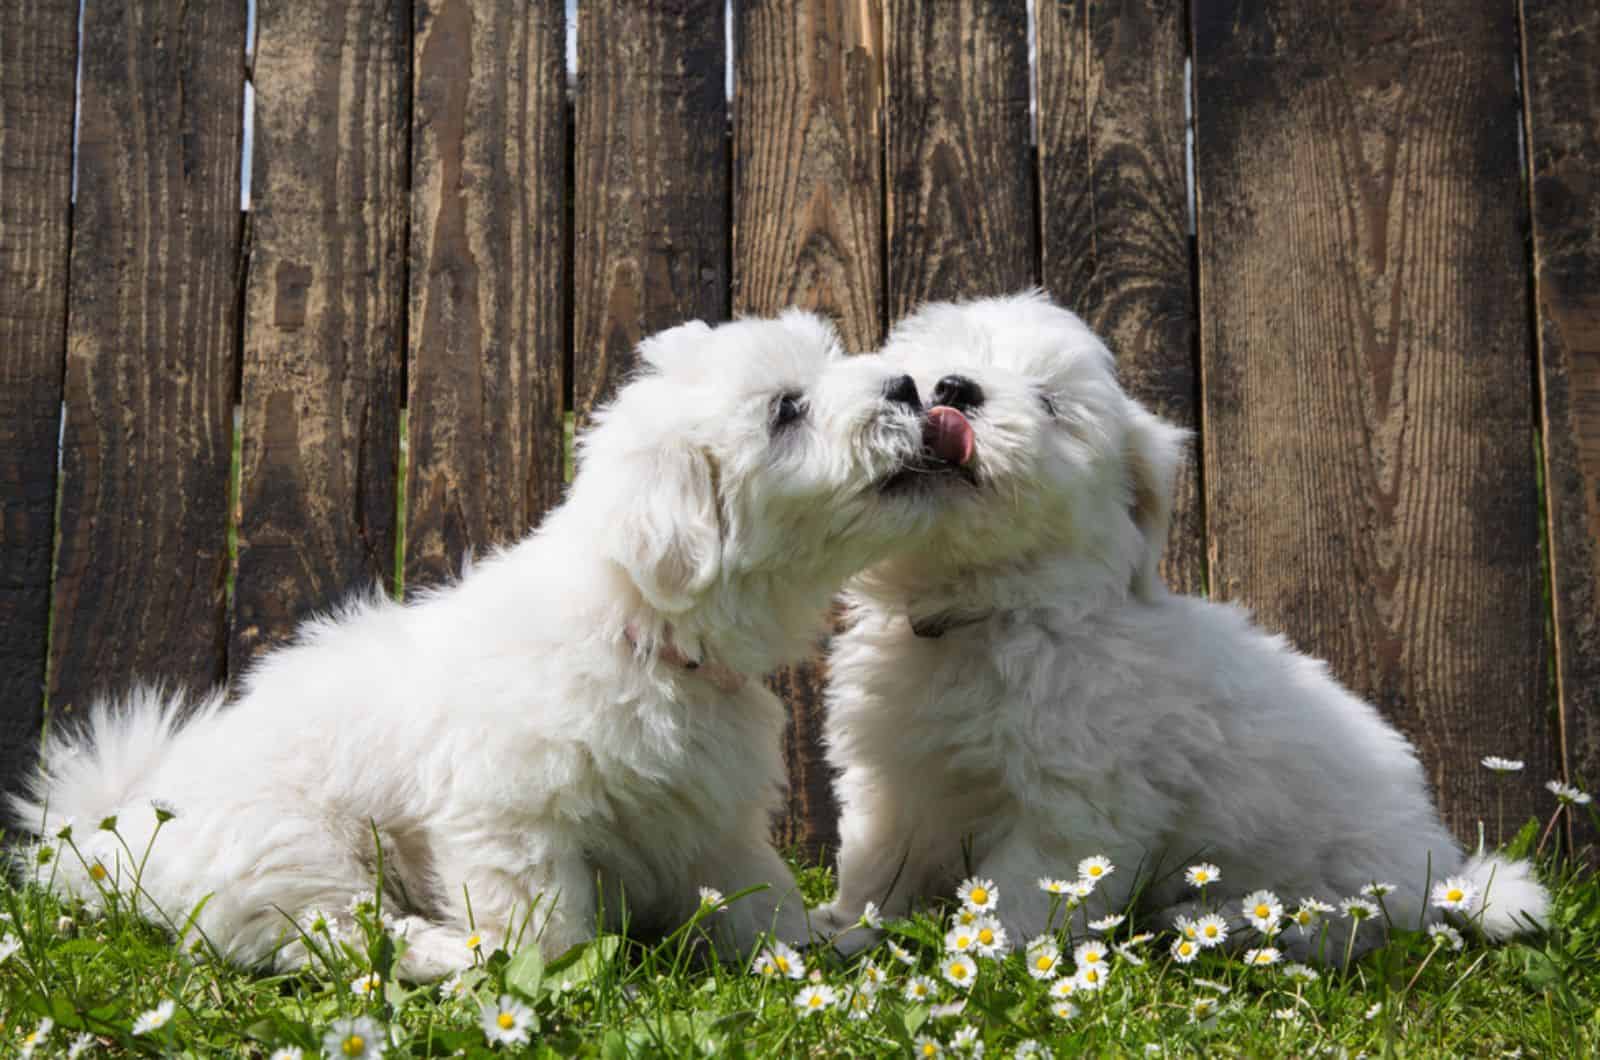 coton de tulear puppies playing in the yard